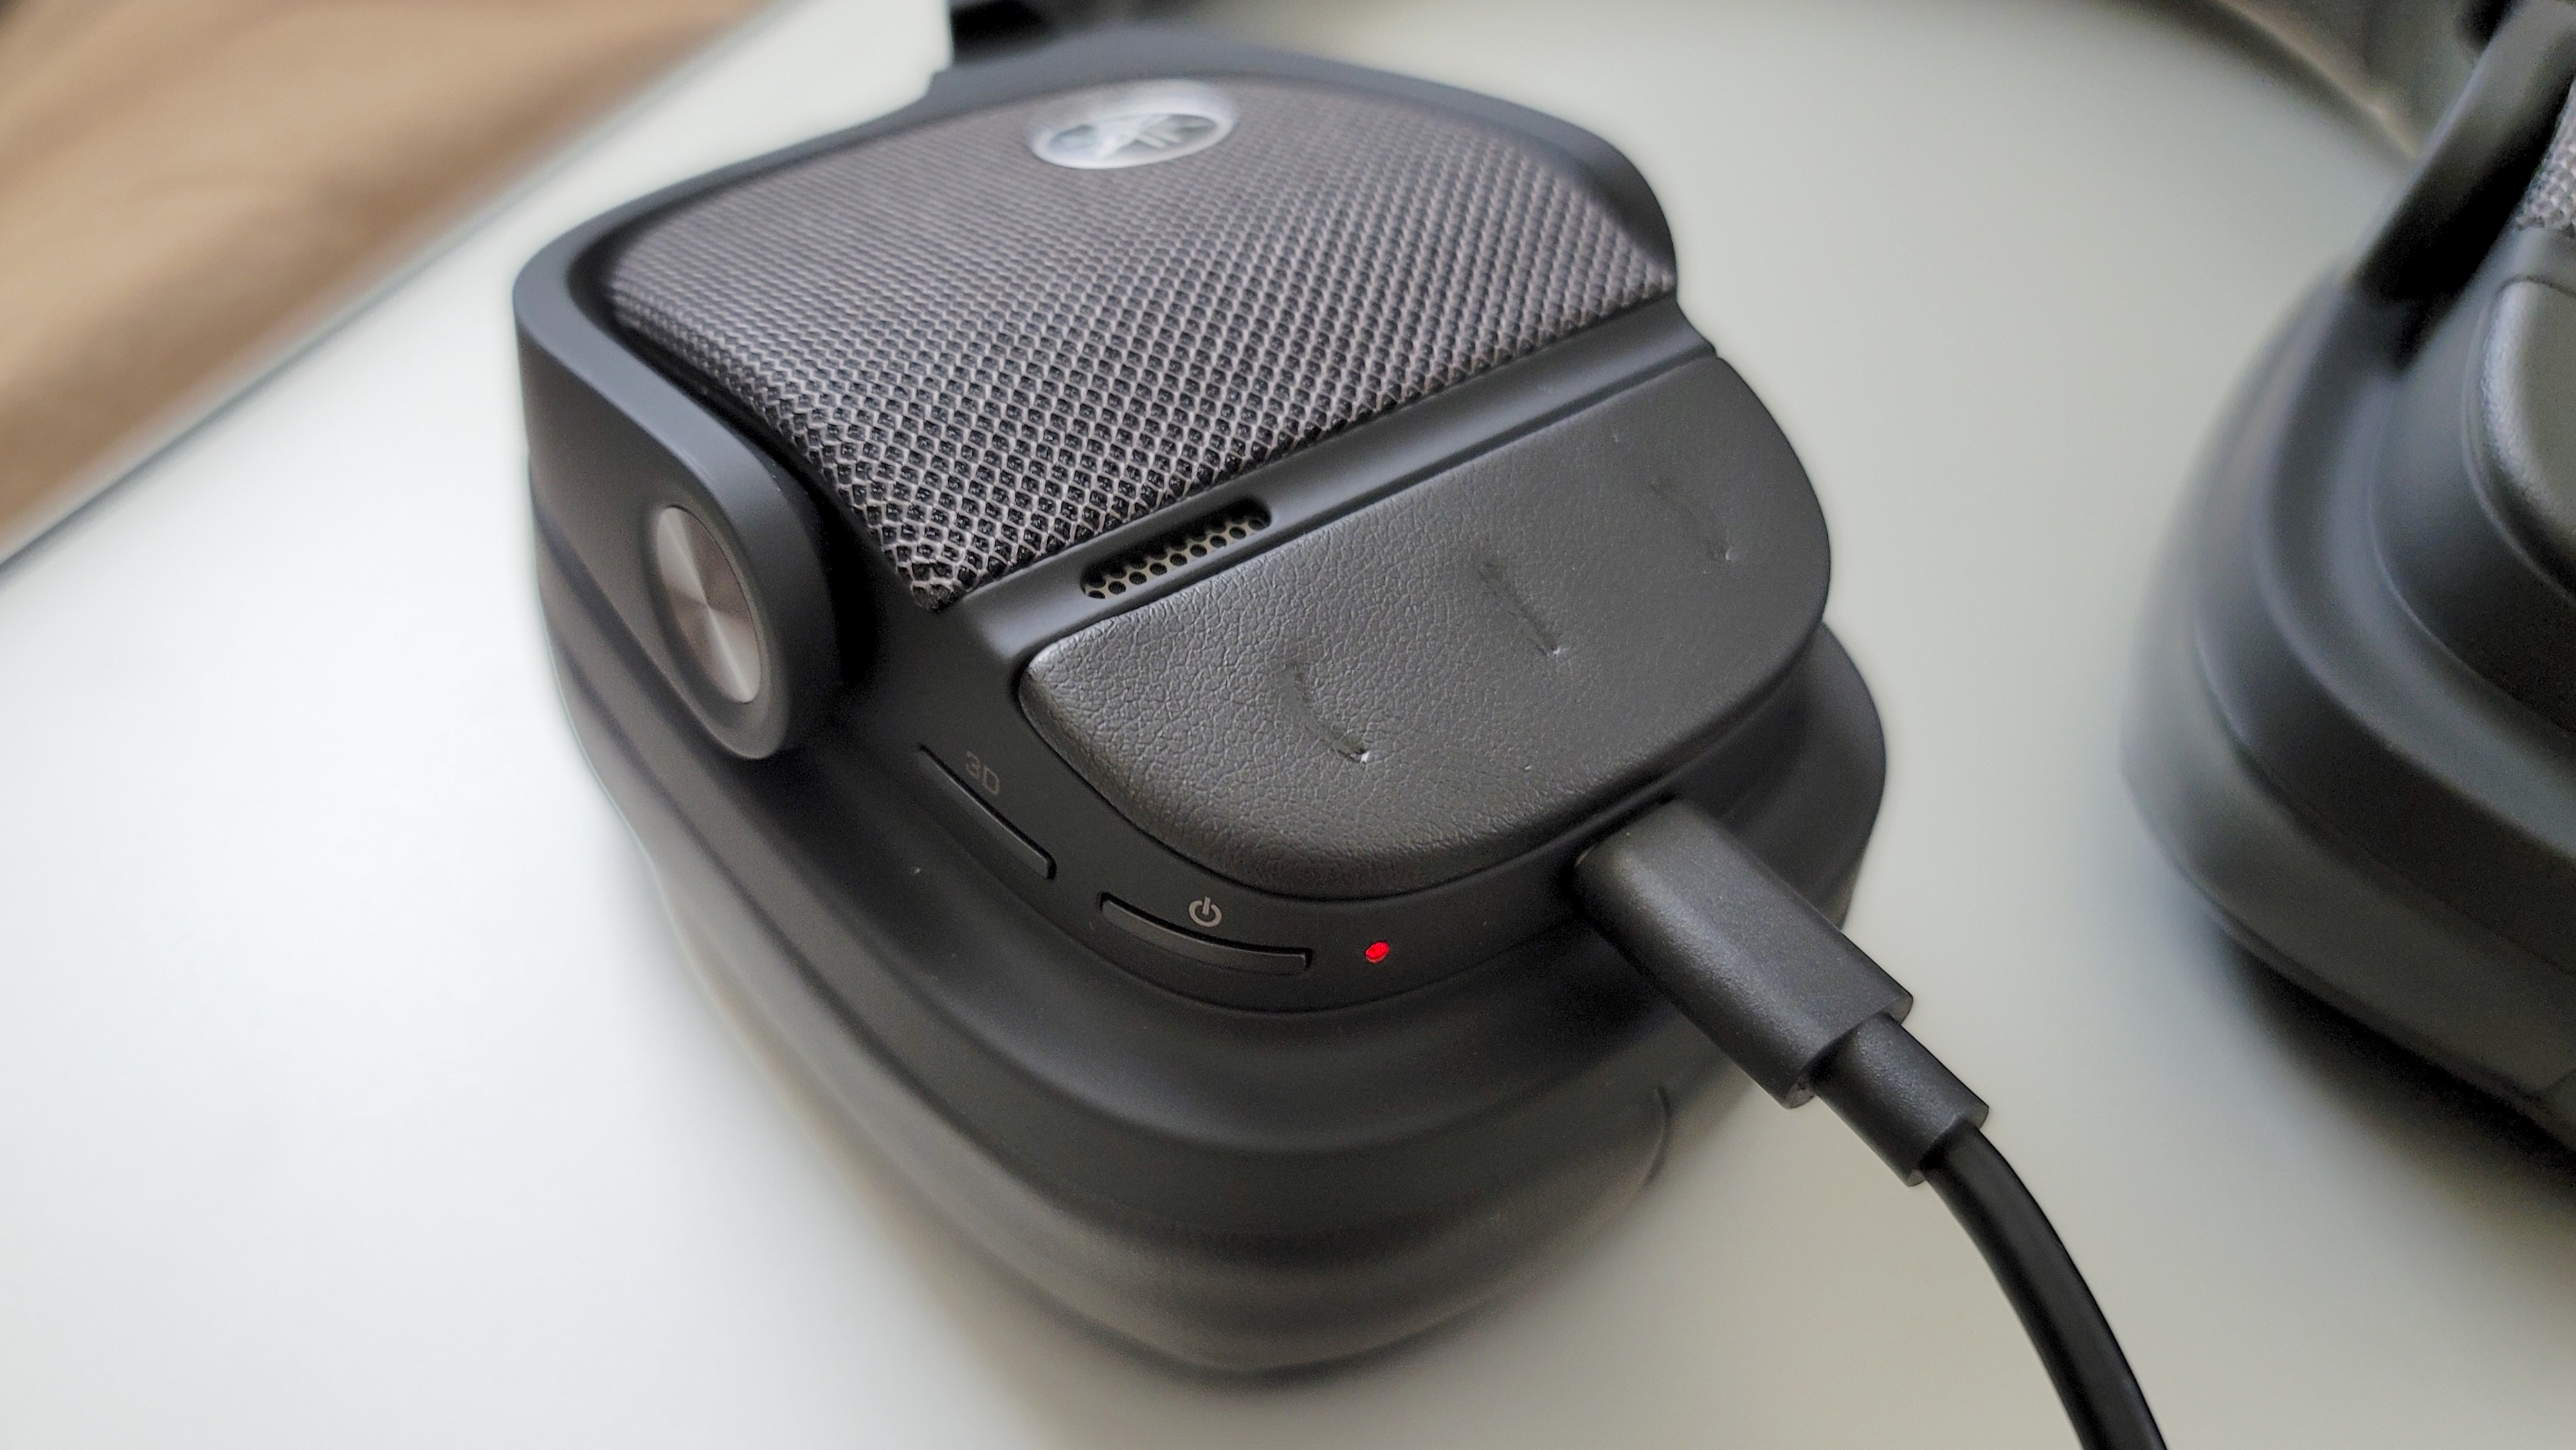 The Yamaha YH-L700A headphones being charged